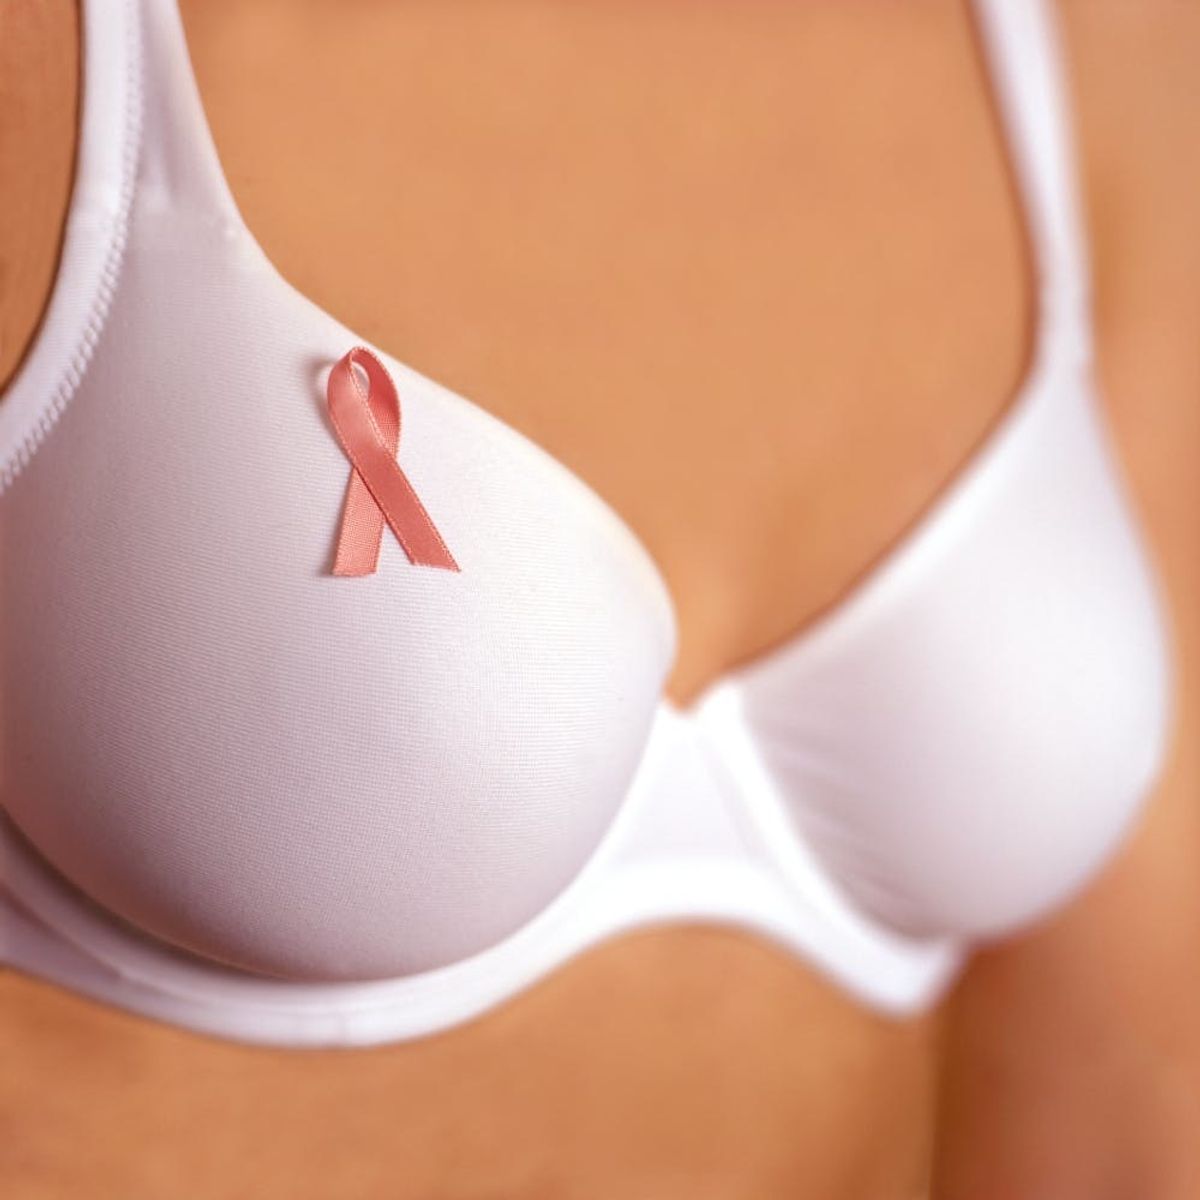 Scientists May Have Found a Cure for the Deadliest Form of Breast Cancer